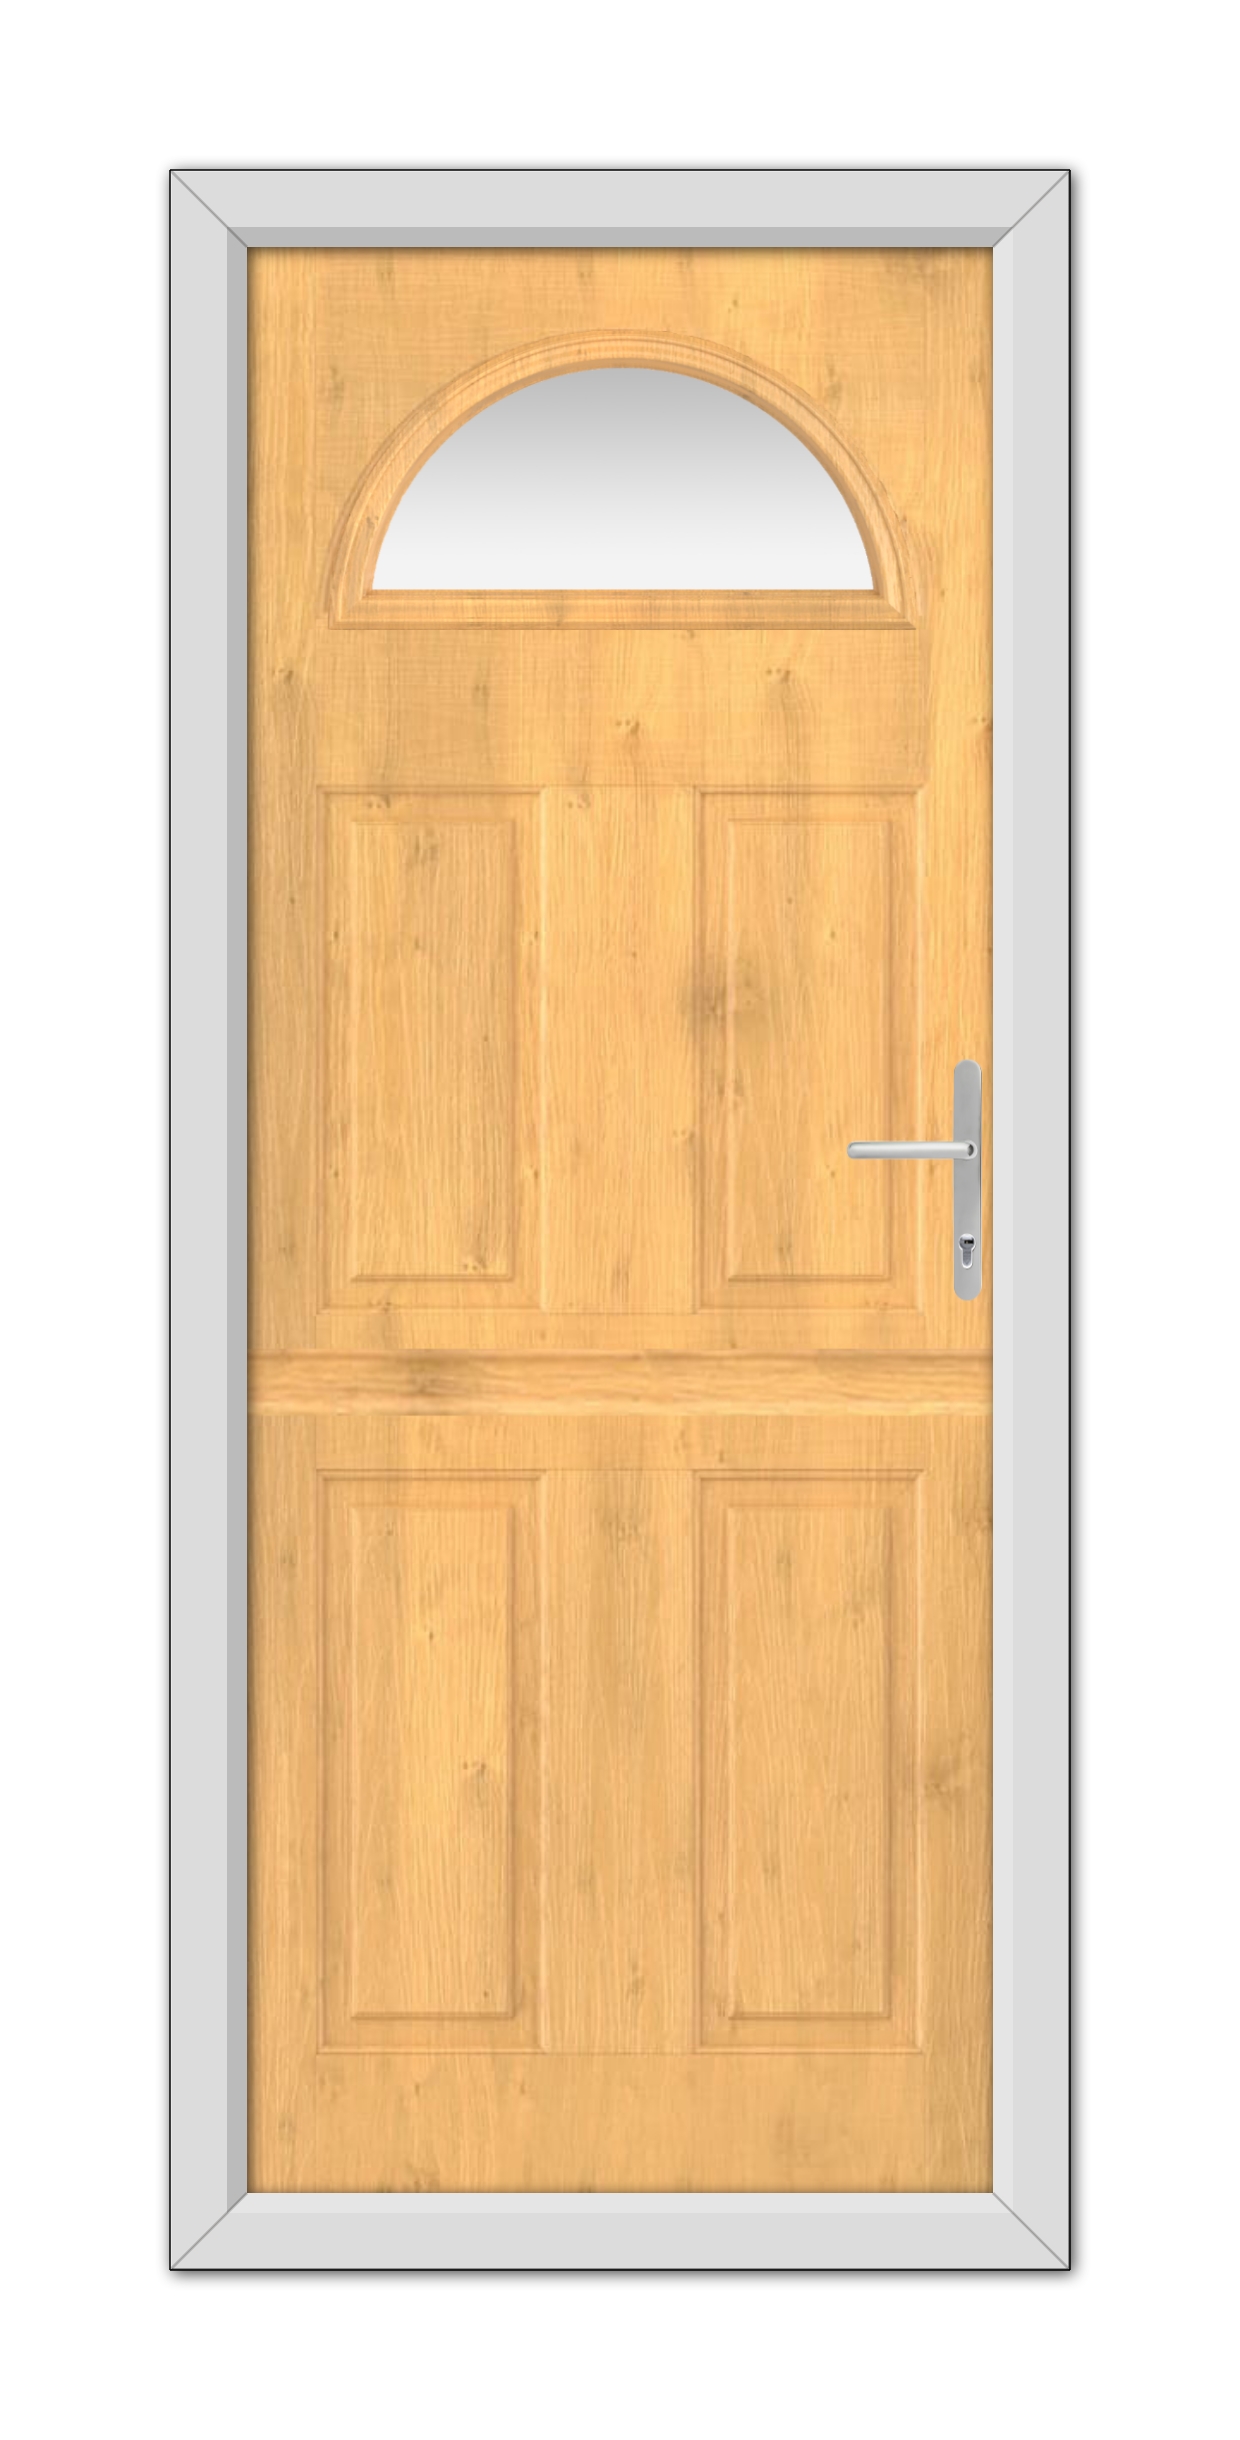 An Irish Oak Winslow 1 Stable Composite Door 48mm Timber Core with an arched window at the top, fitted with a metal handle, set within a grey frame.